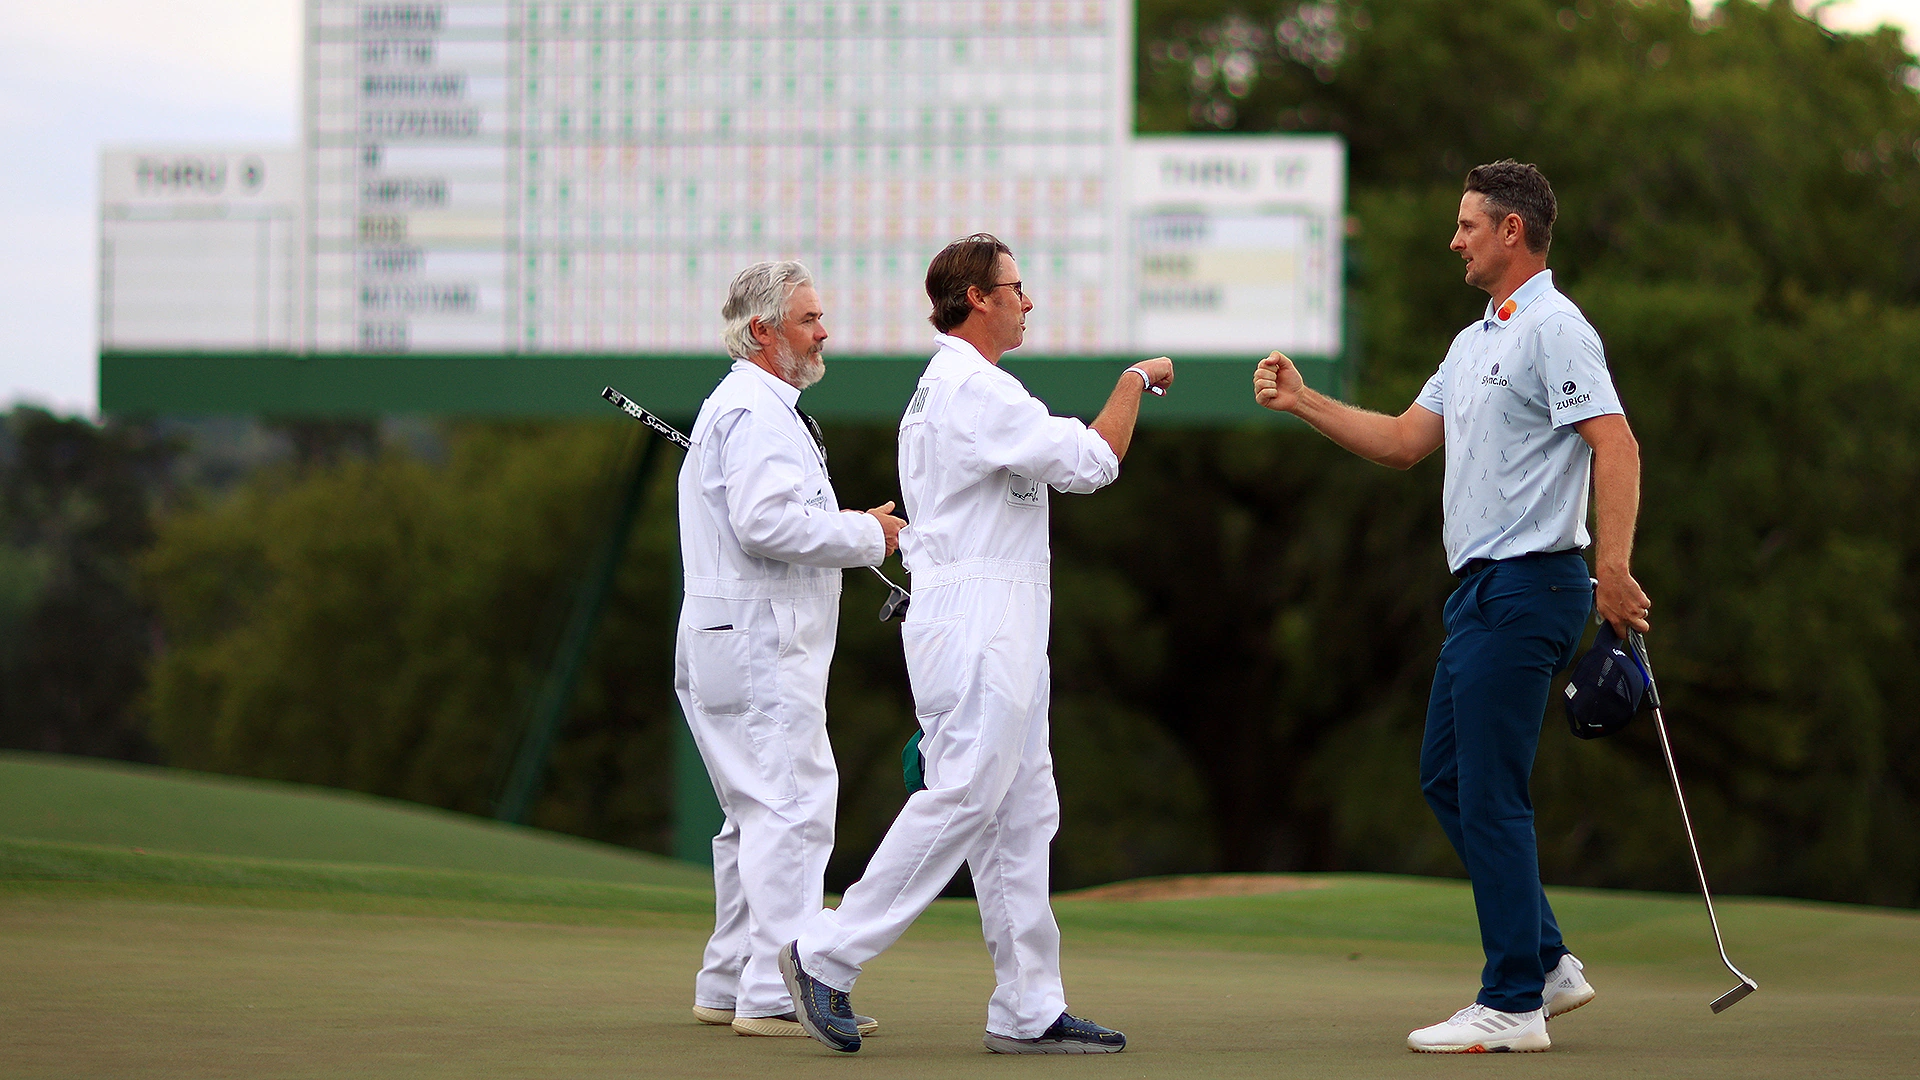 2021 Masters: Justin Rose fires 65 to lead by four shots after Day 1 of 85th Masters